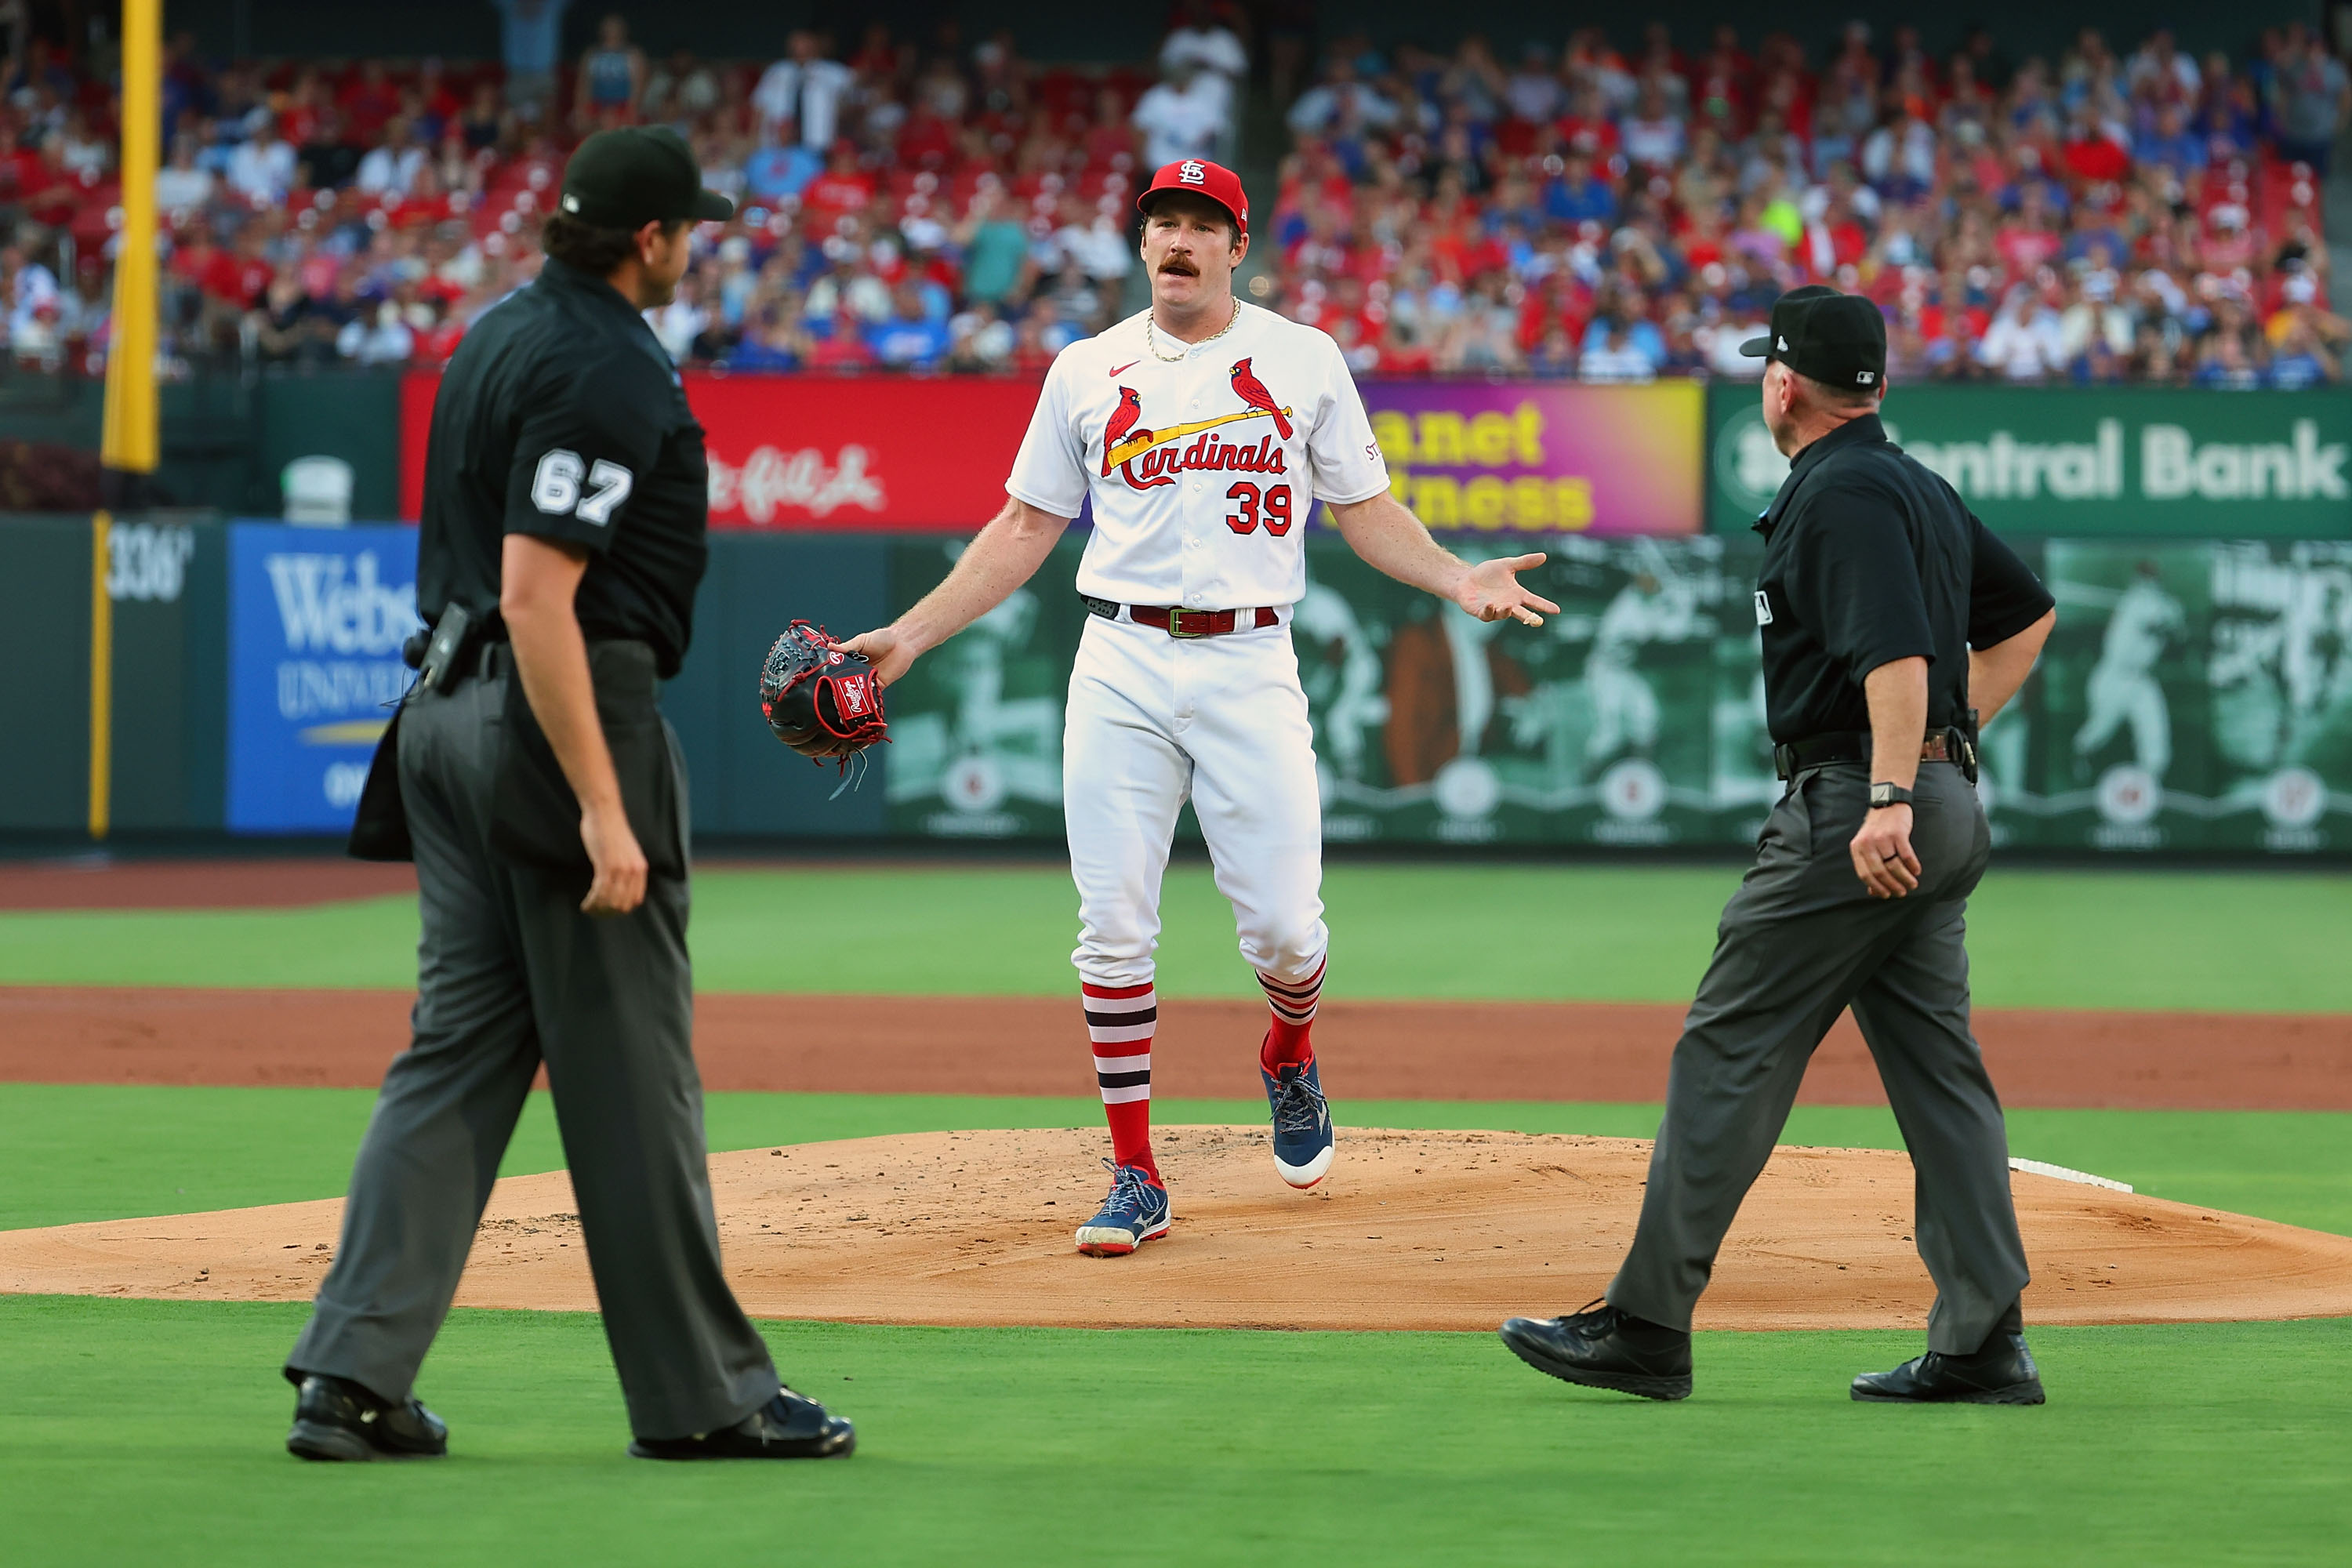 MLB fans react to Cardinals starter getting ejected after hitting Ian Happ 